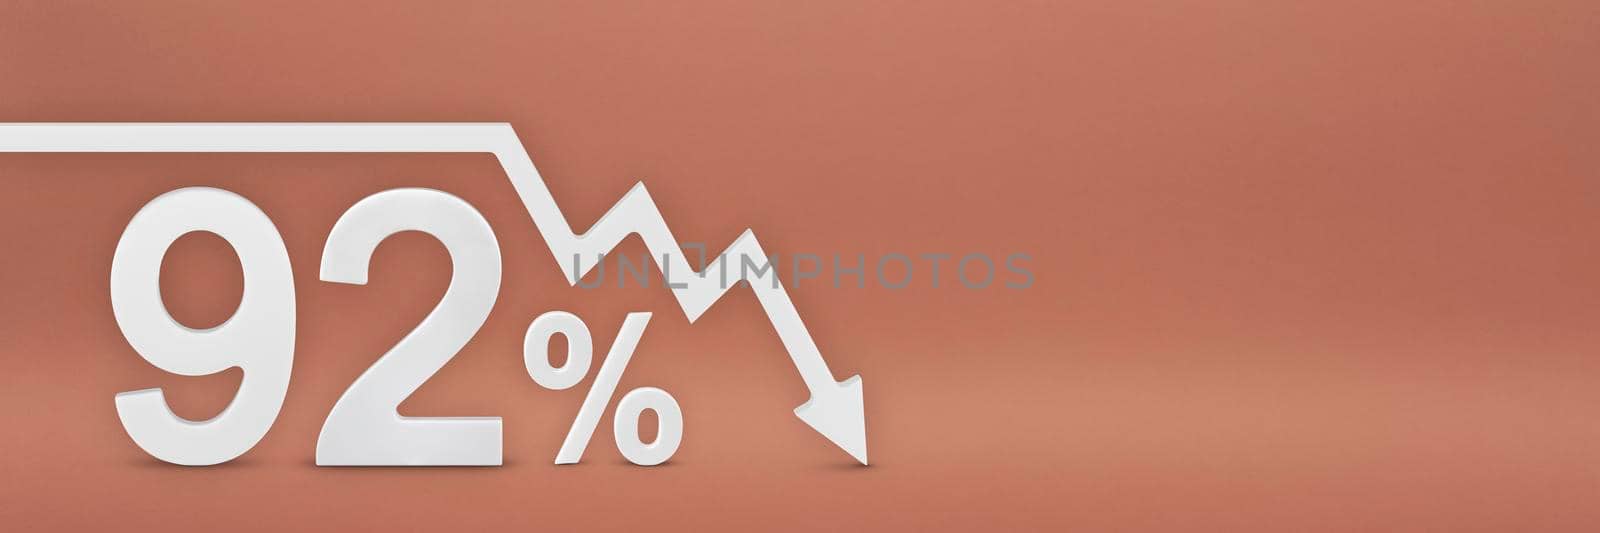 ninety-two percent, the arrow on the graph is pointing down. Stock market crash, bear market, inflation.Economic collapse, collapse of stocks.3d banner,92 percent discount sign on a red background